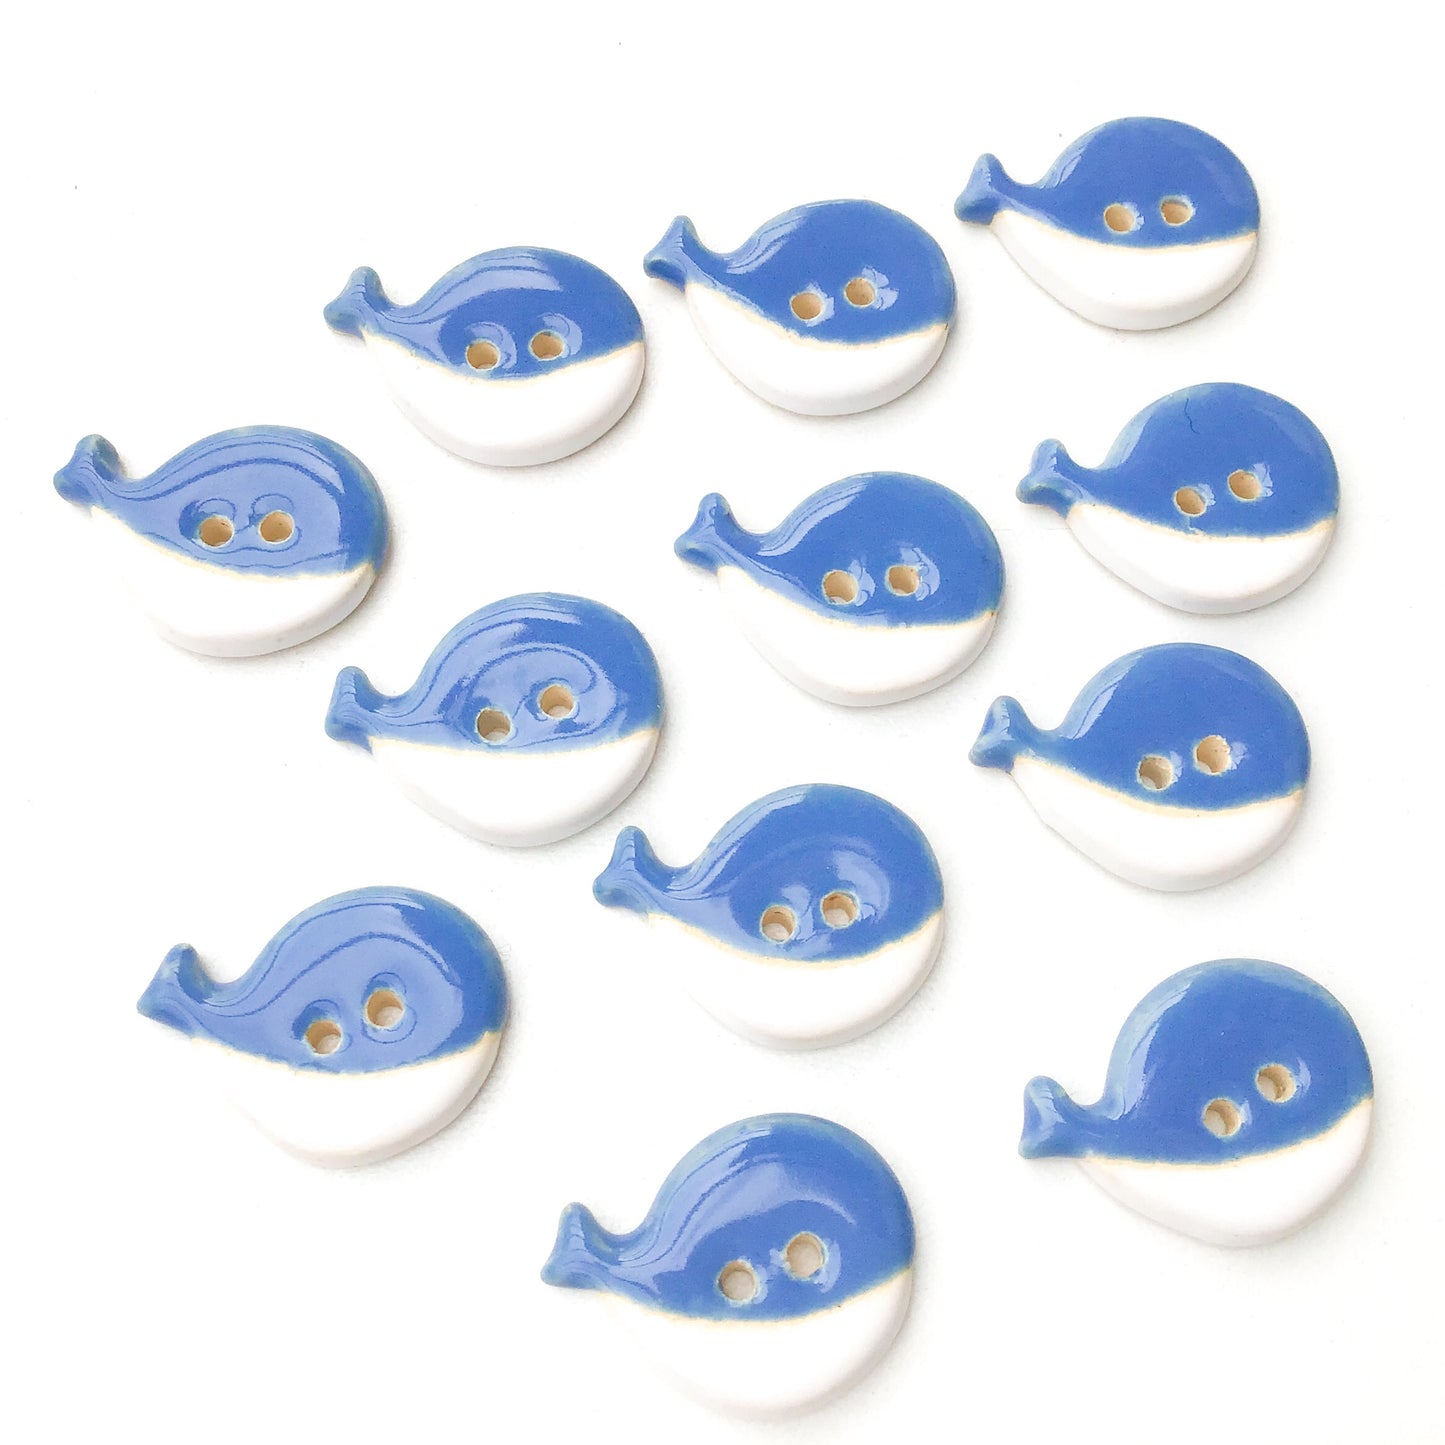 Blue & White Whale Buttons - Ceramic Whale Buttons (ws-7)